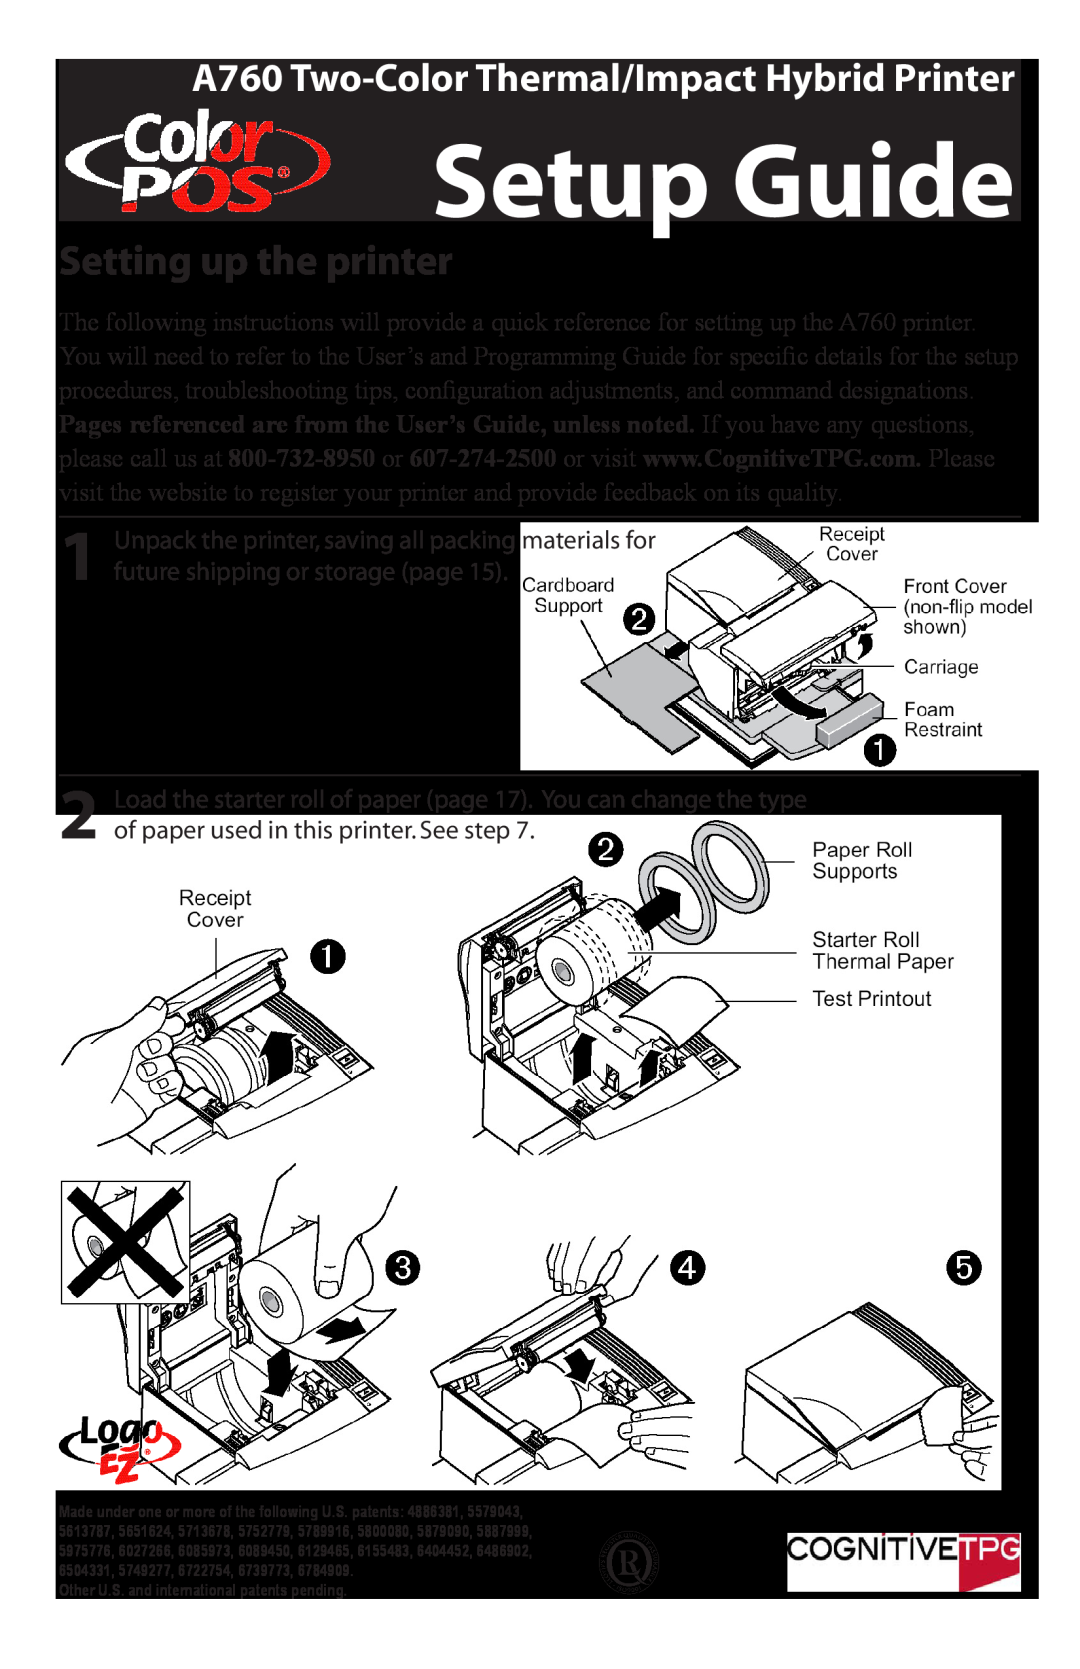 Cognitive Solutions setup guide Setup Guide, Setting up the printer, A760 Two-Color Thermal/Impact Hybrid Printer 